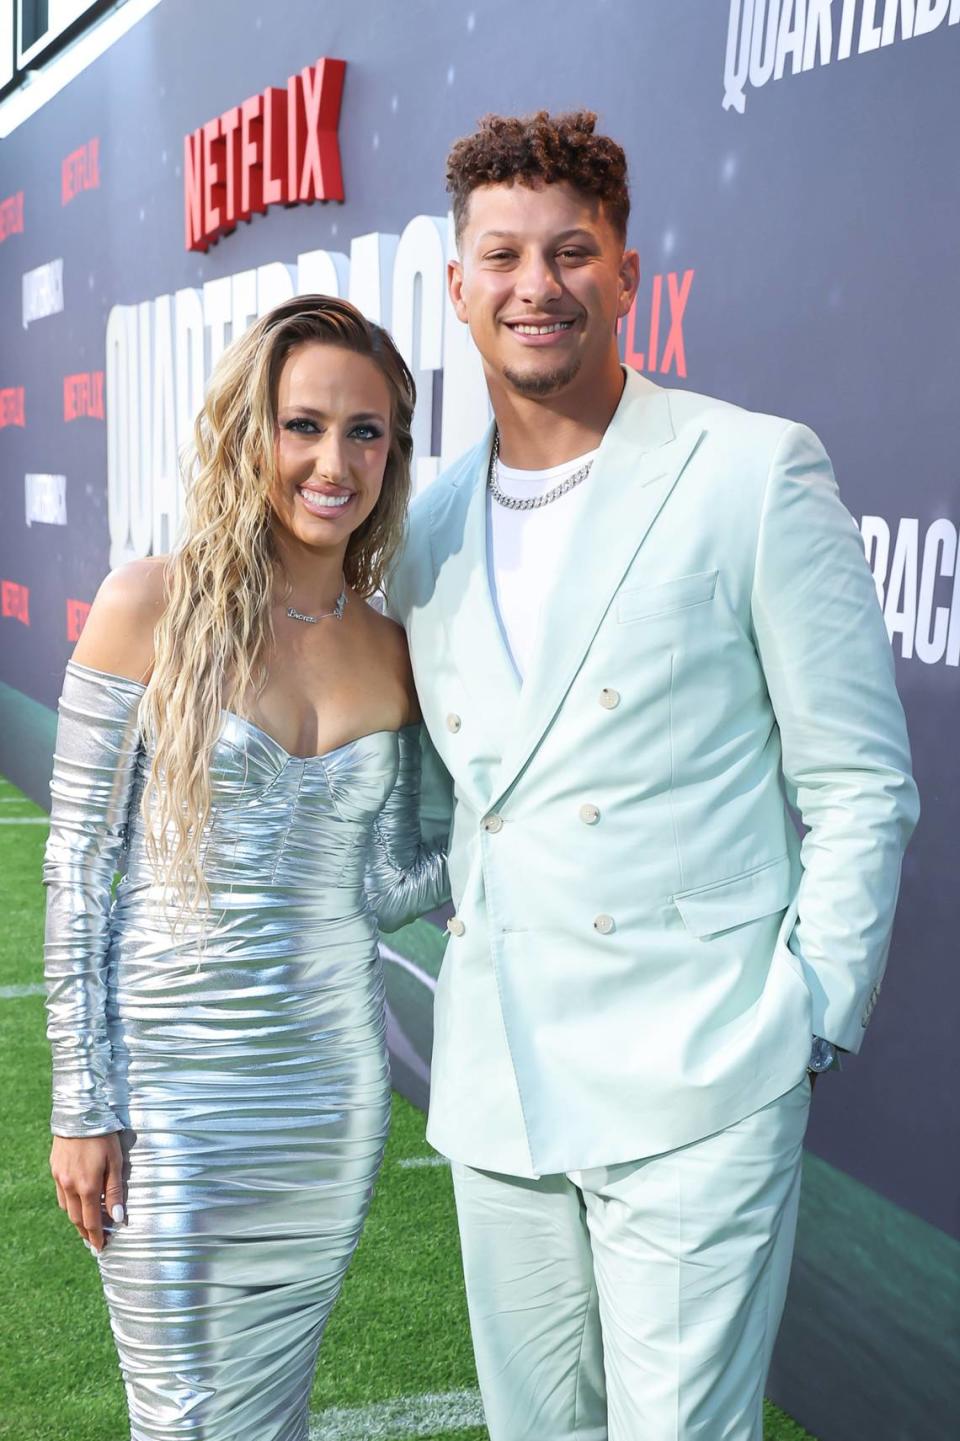 Brittany Mahomes and Patrick Mahomes at the Tuesday Netflix premiere of “Quarterback” in Los Angeles.